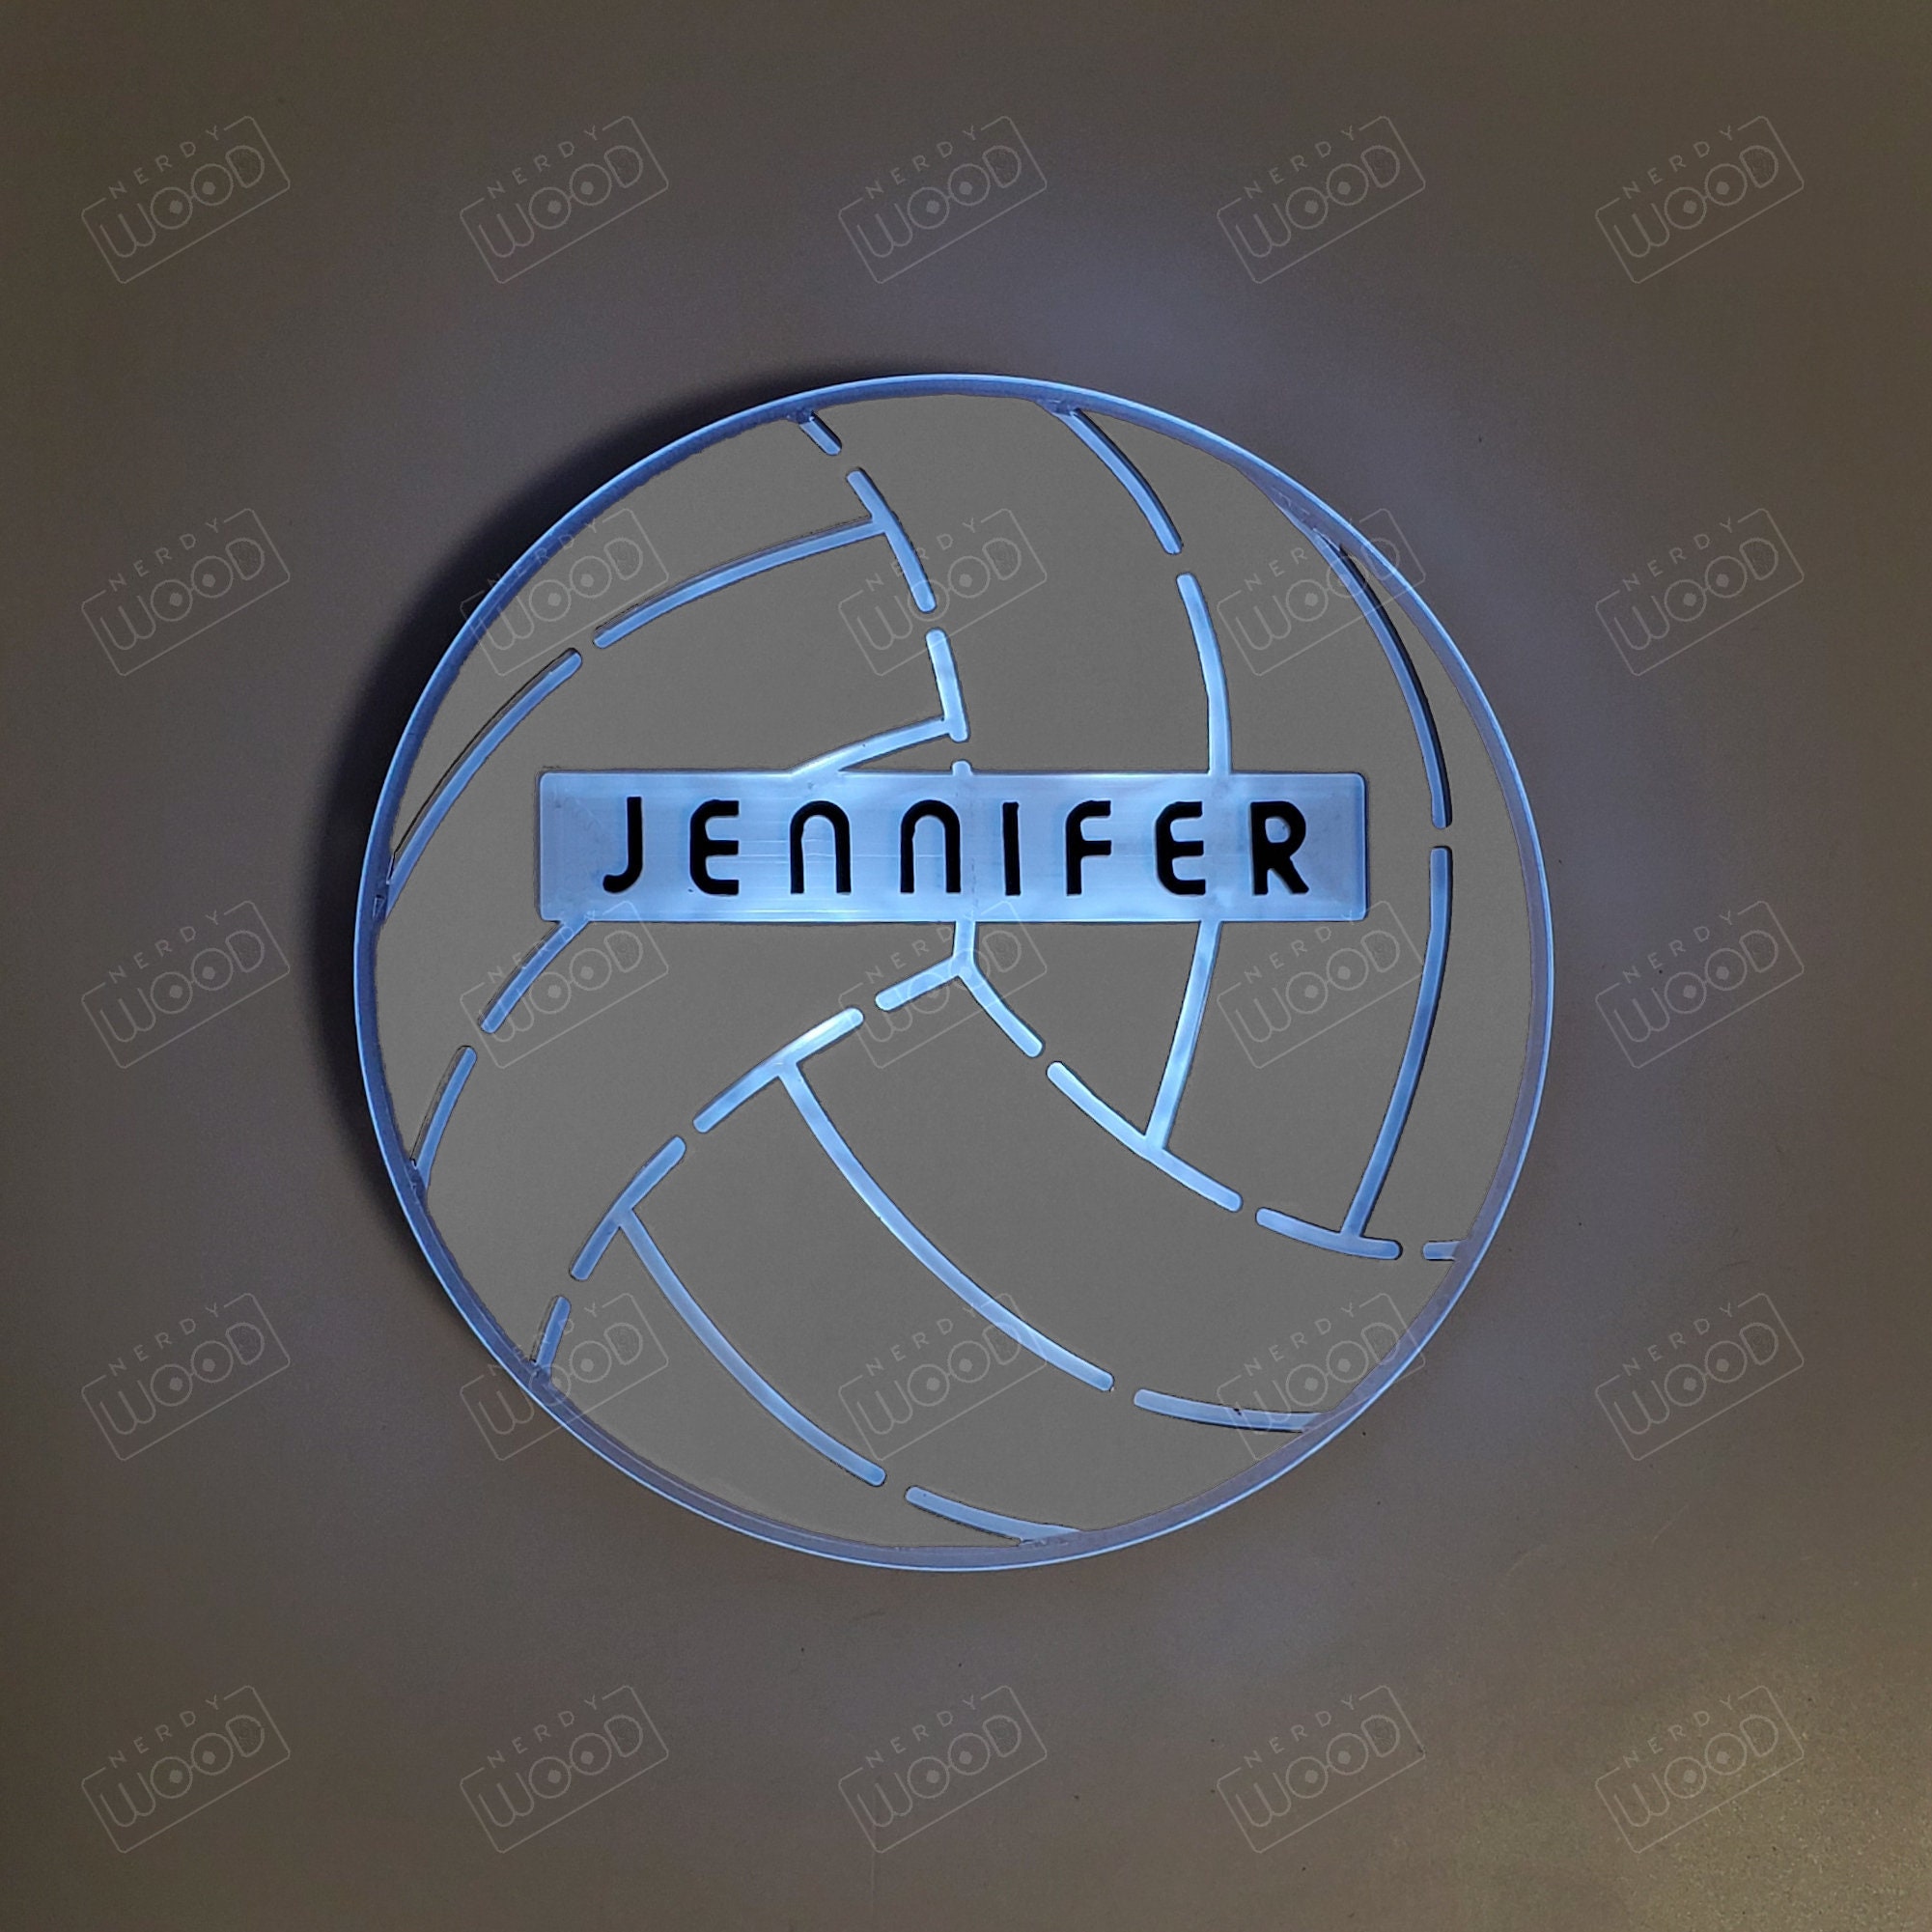  Custom Volleyball Neon Sign, Volleyball Player LED Neon Light  for Wall Decor, Metal Name Light Up Sign for Wall Art USB Operated with  Remote Control Teen Girls Gift for Christmas